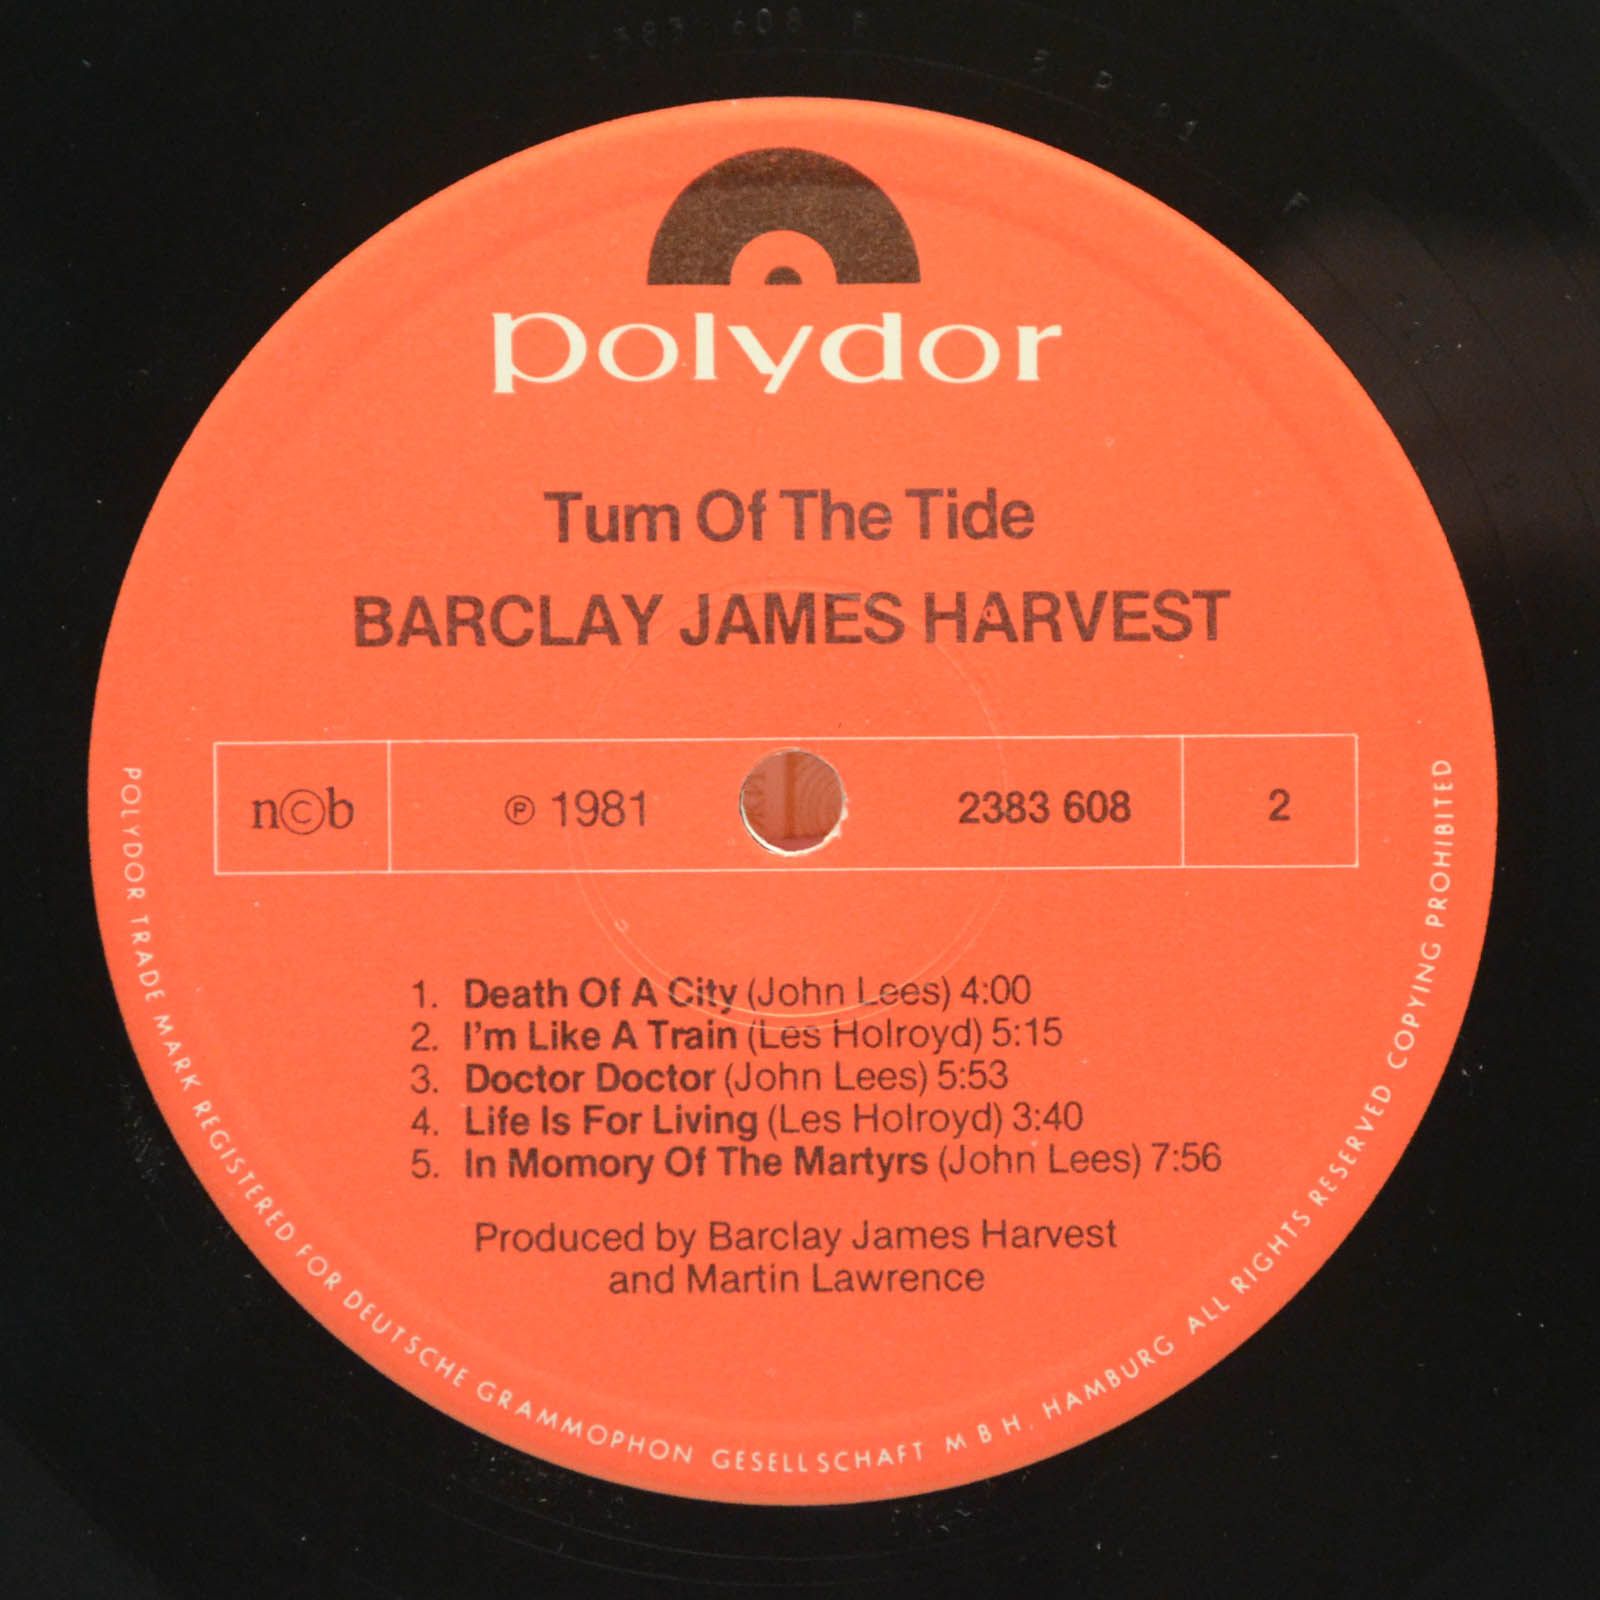 Barclay James Harvest — Turn Of The Tide, 1981